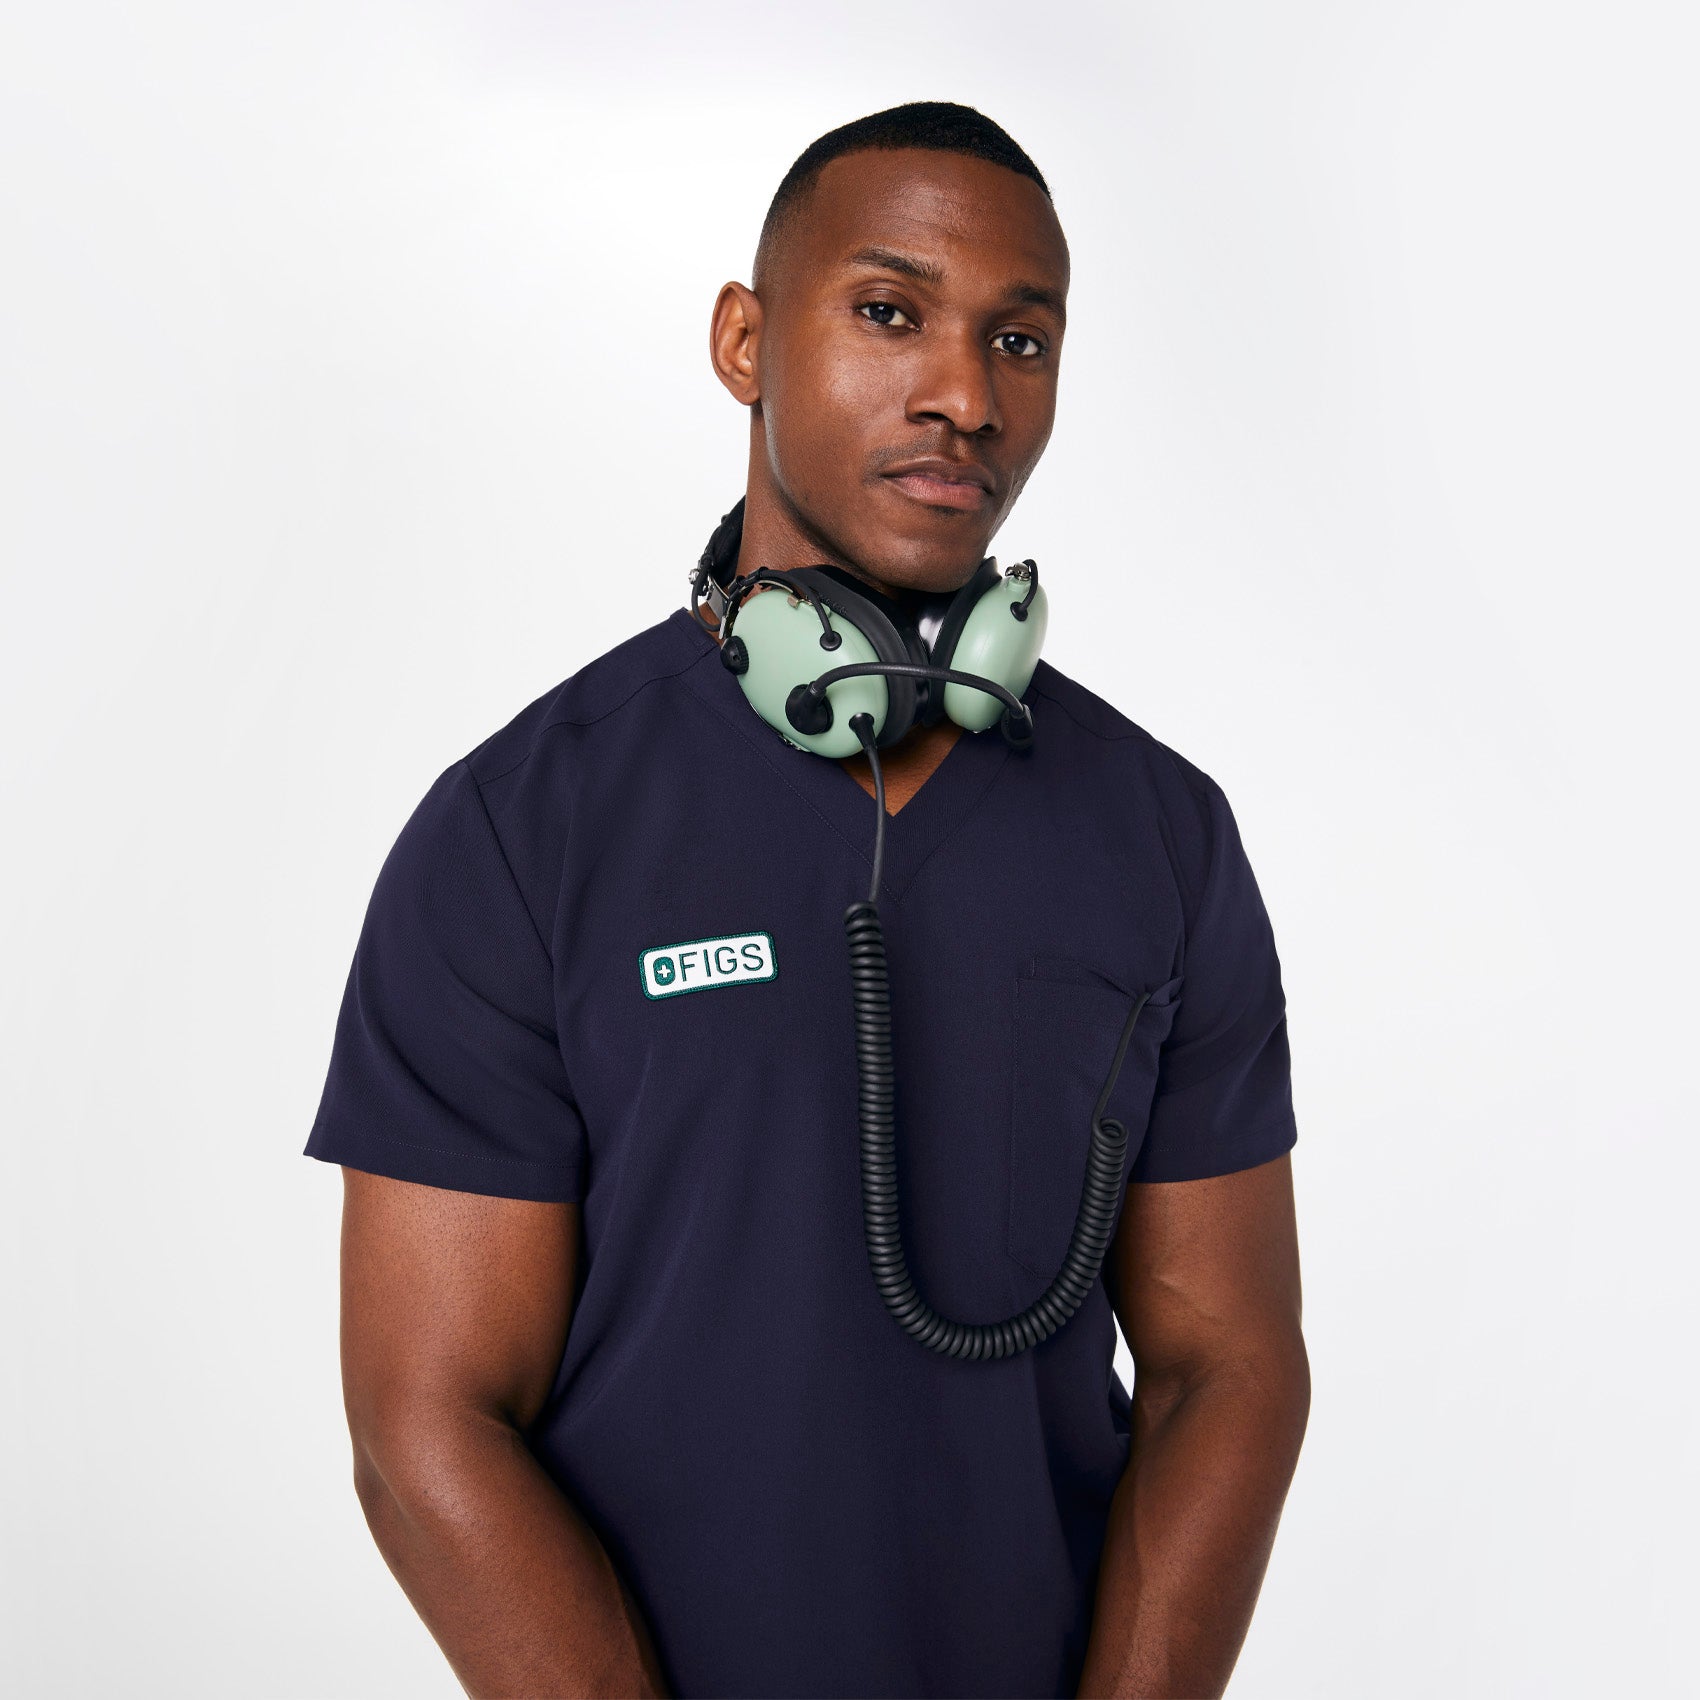 FIGS mens Leon Medical Scrubs Shirt : Buy Online at Best Price in KSA -  Souq is now : Fashion